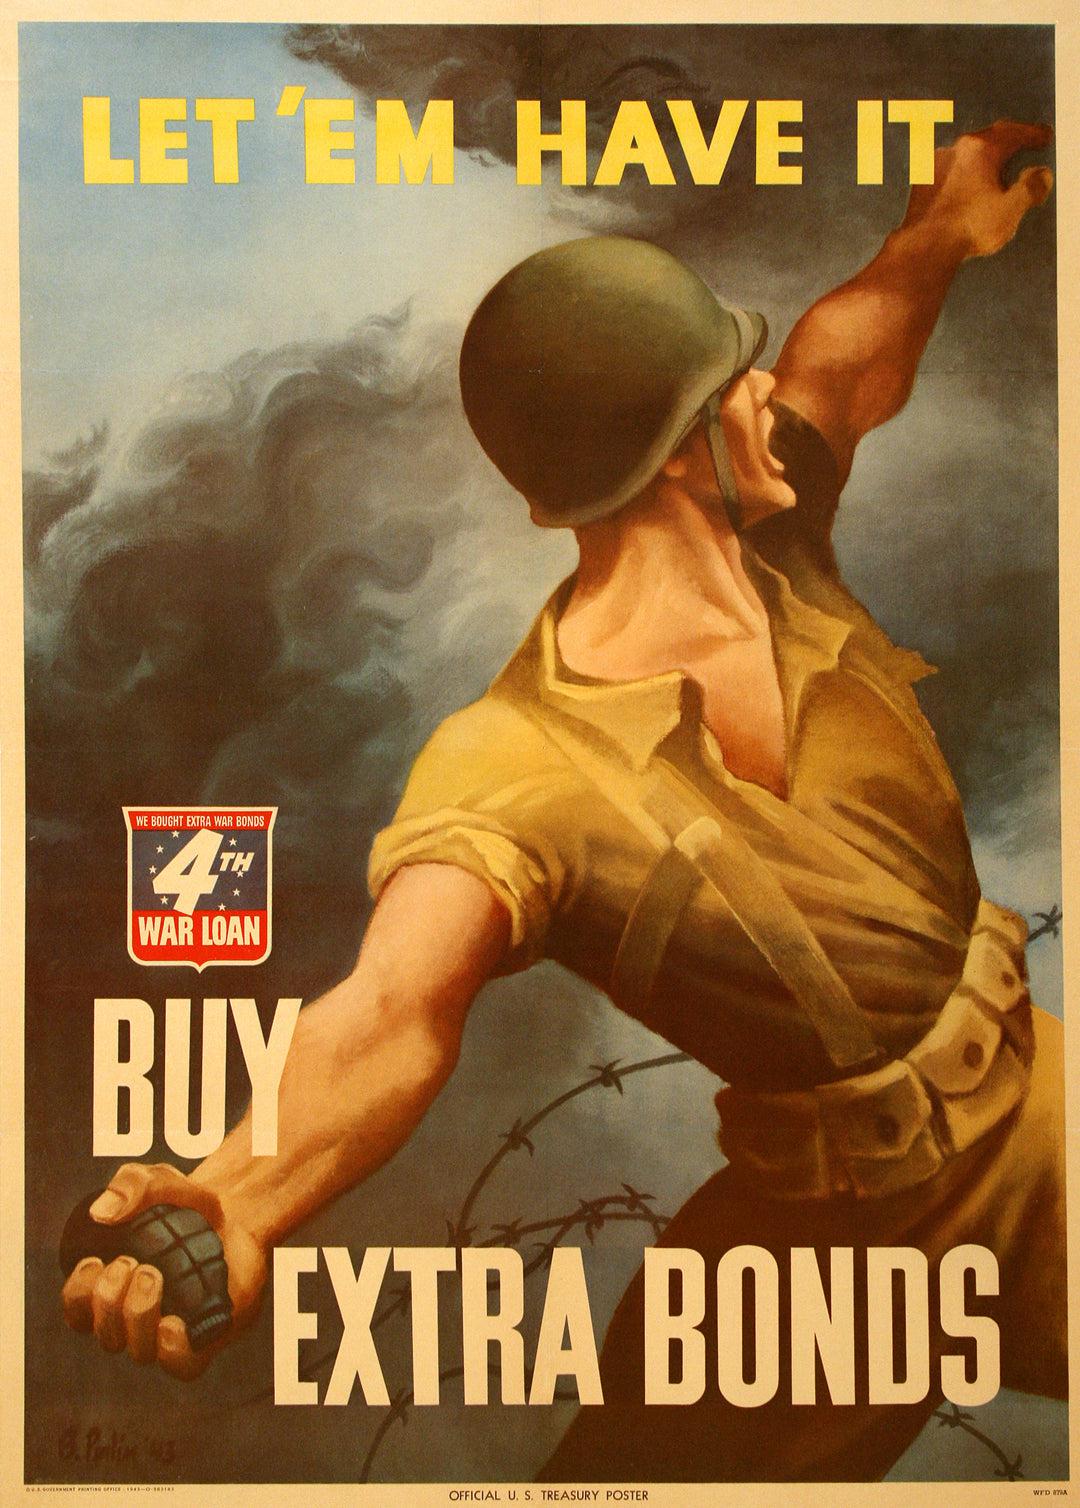 Original WWII 1943 Poster - Let 'Em Have It by Bernard Perlin - Small